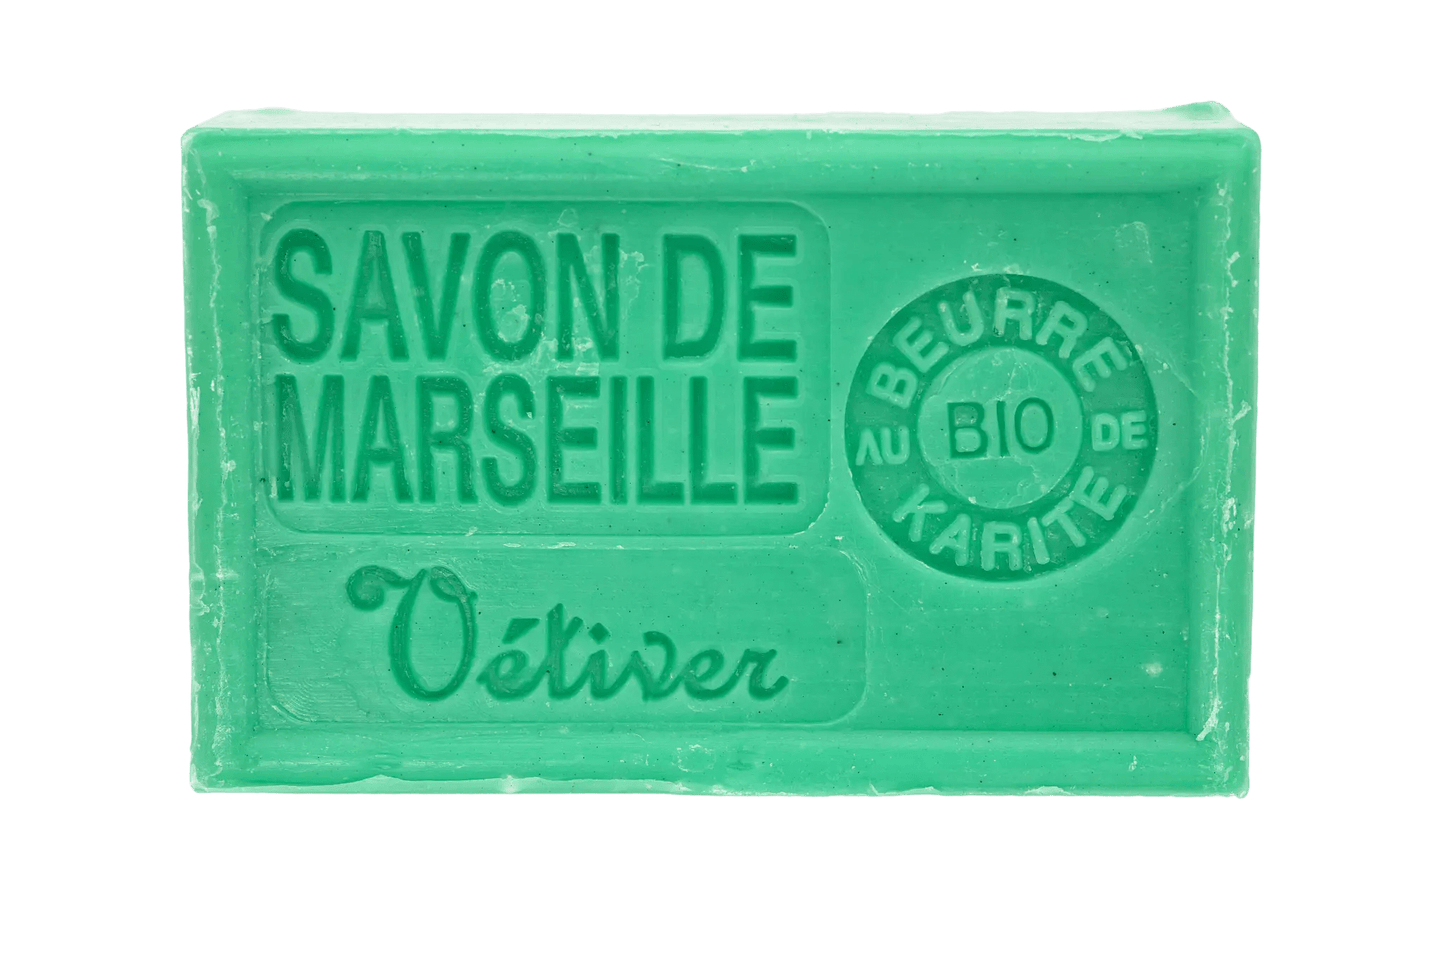 Vetiver scented Marseille soap